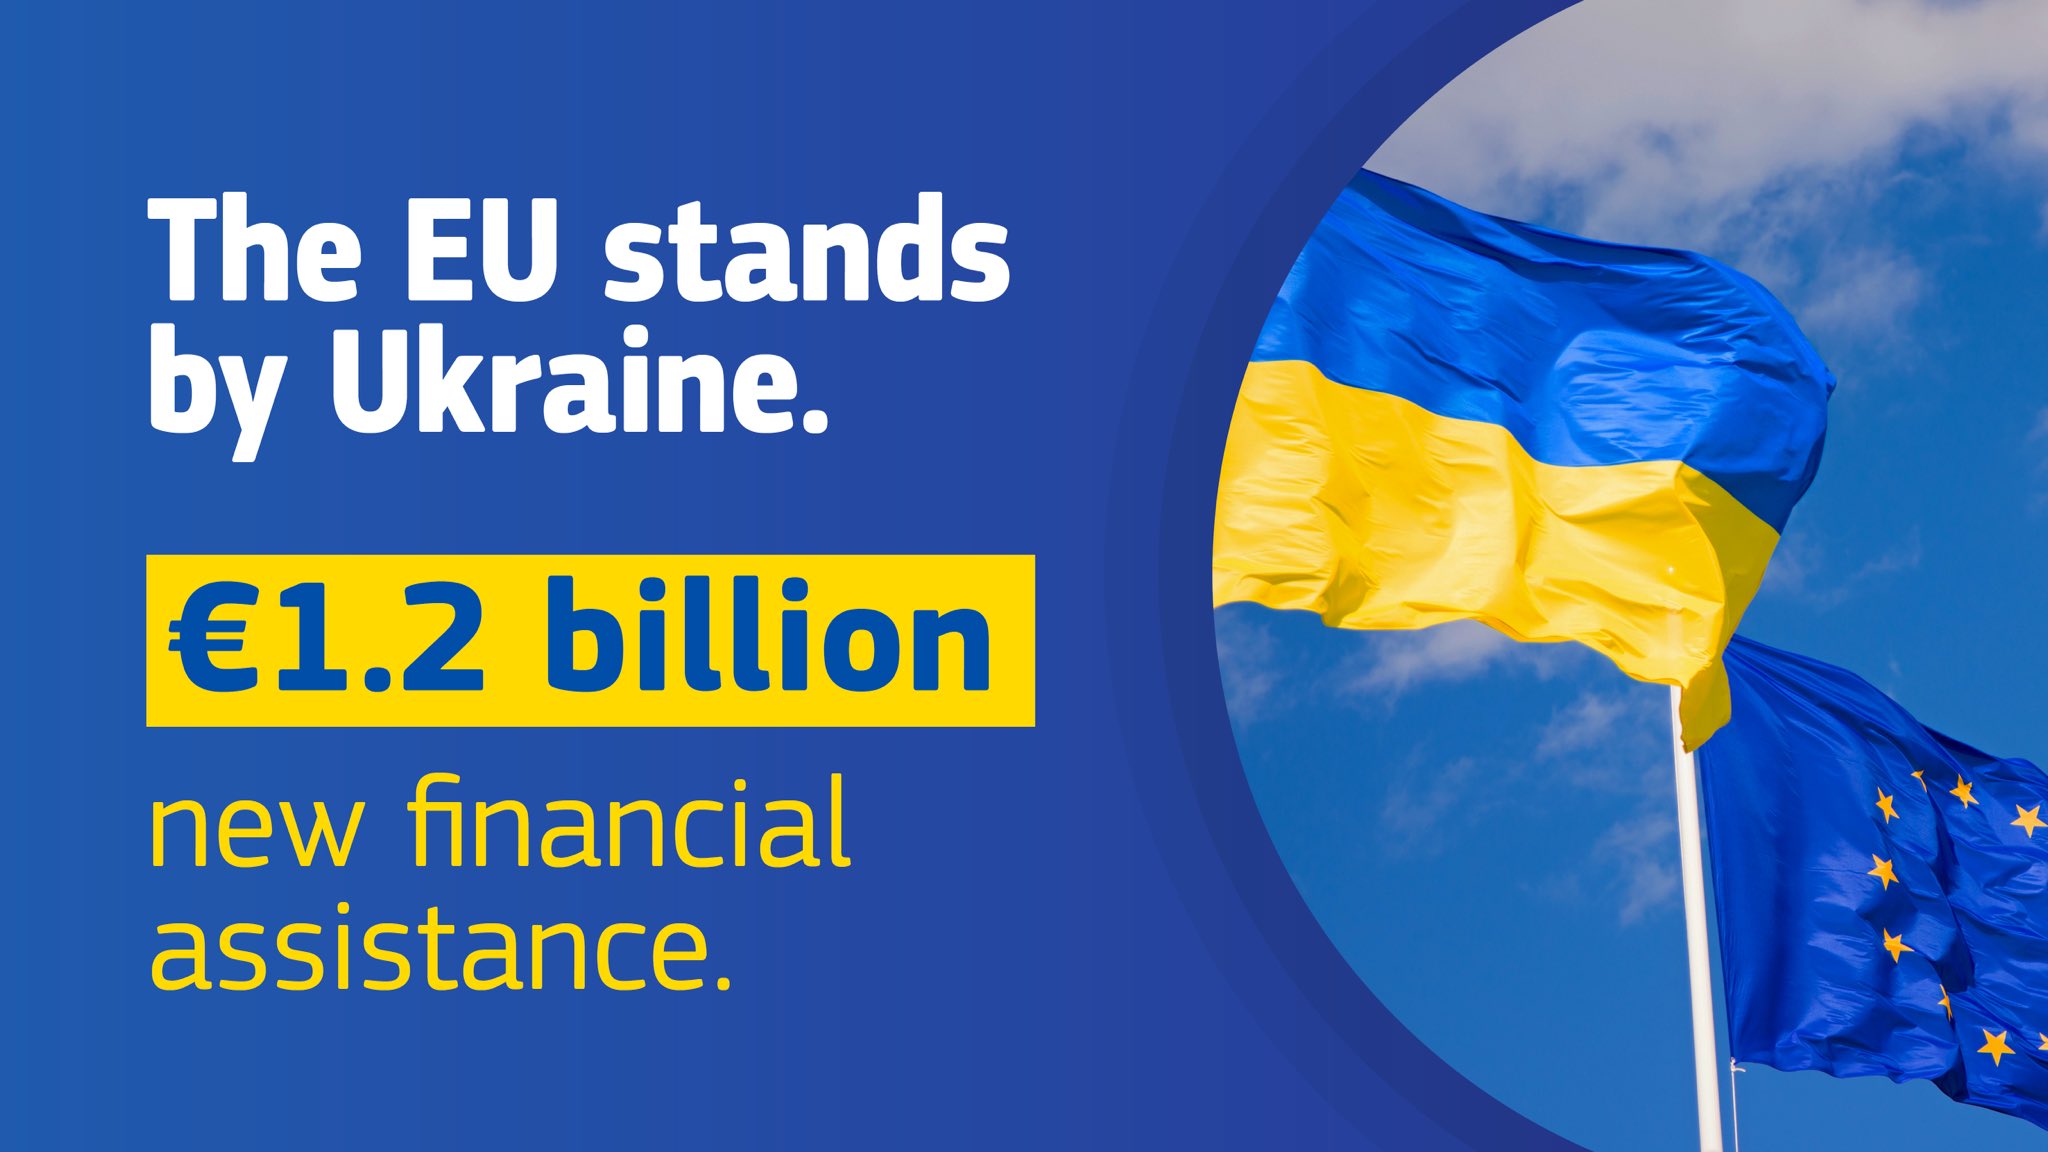 Twitter 上的ursula Von Der Leyen As I Announced Last Week The Eu Commission Has Proposed A 1 2 Billion Financial Assistance Package For Ukraine I Call On Europarl En And Eu Countries To Agree Swiftly